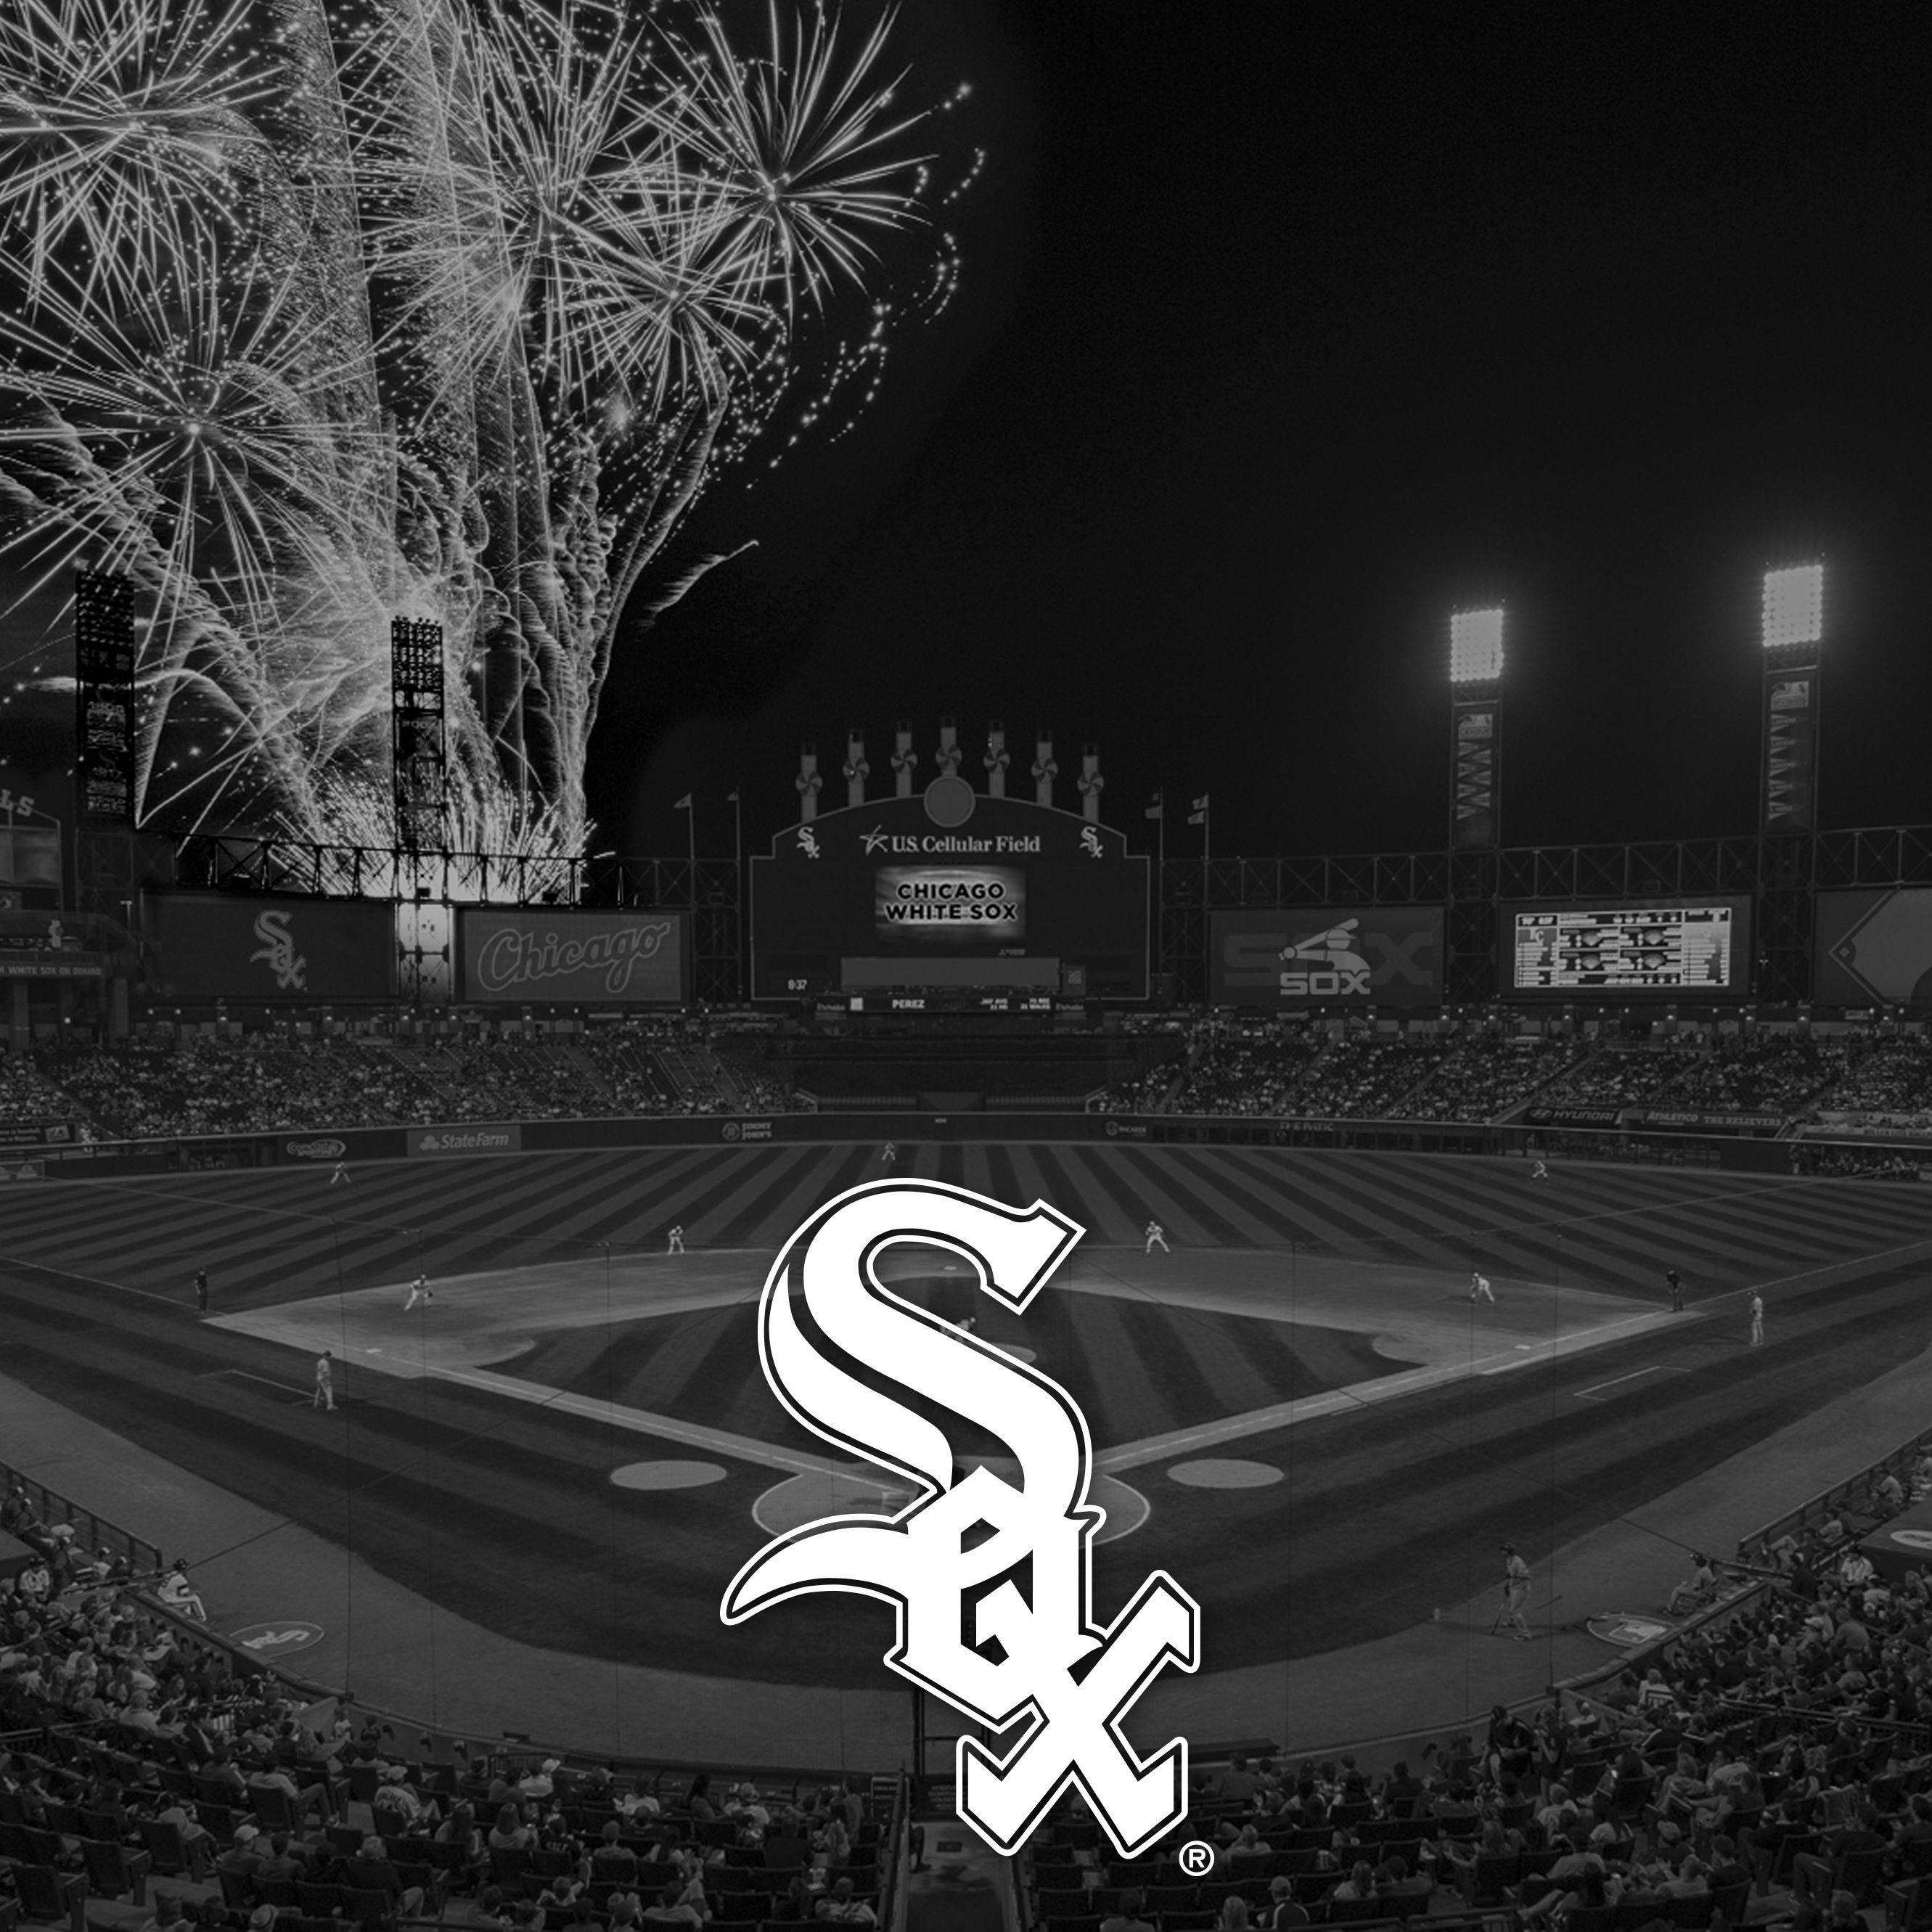 White Sox Wallpaper. Chicago White Sox. Cool stuff in 2019